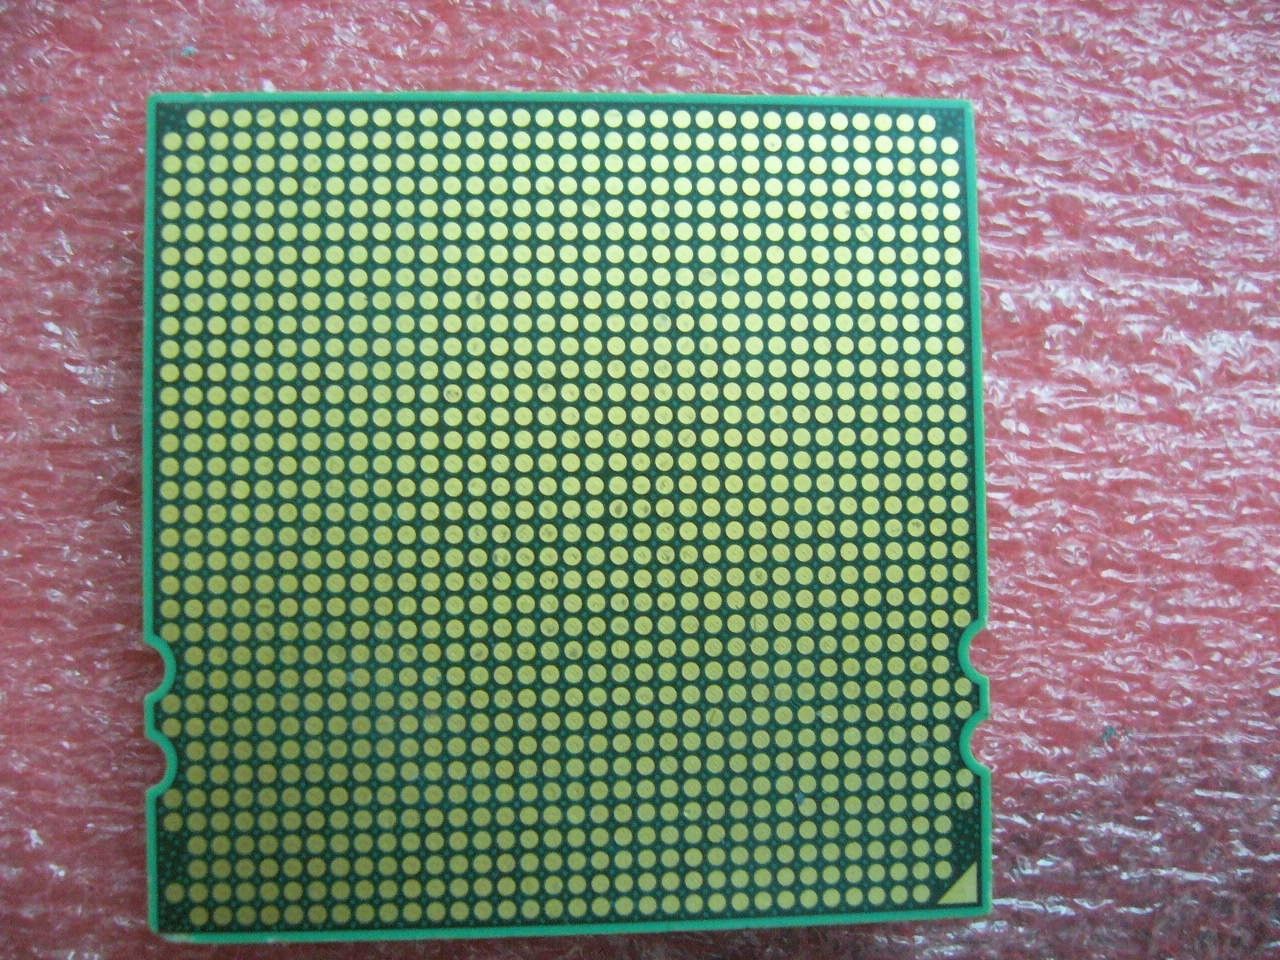 QTY 1x AMD Opteron 2356 2.3 GHz Quad-Core (OS2356WAL4BGH) CPU Socket F 1207 - Click Image to Close